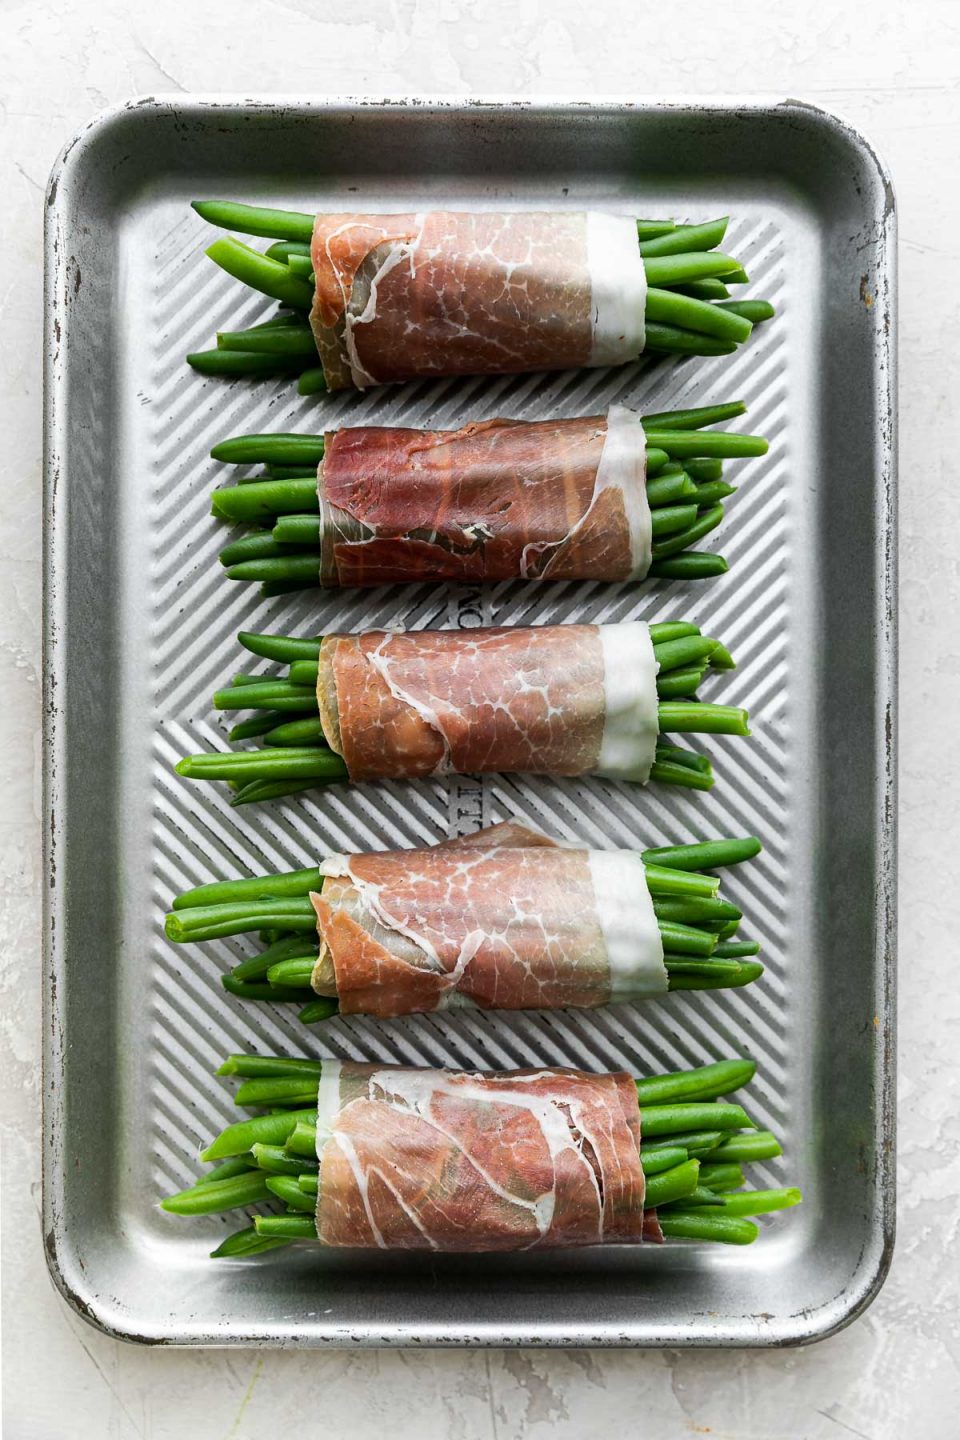 Five finished prosciutto-wrapped green bean bundles arranged on a small aluminum baking sheet. The baking sheet sits atop a creamy white plaster surface.